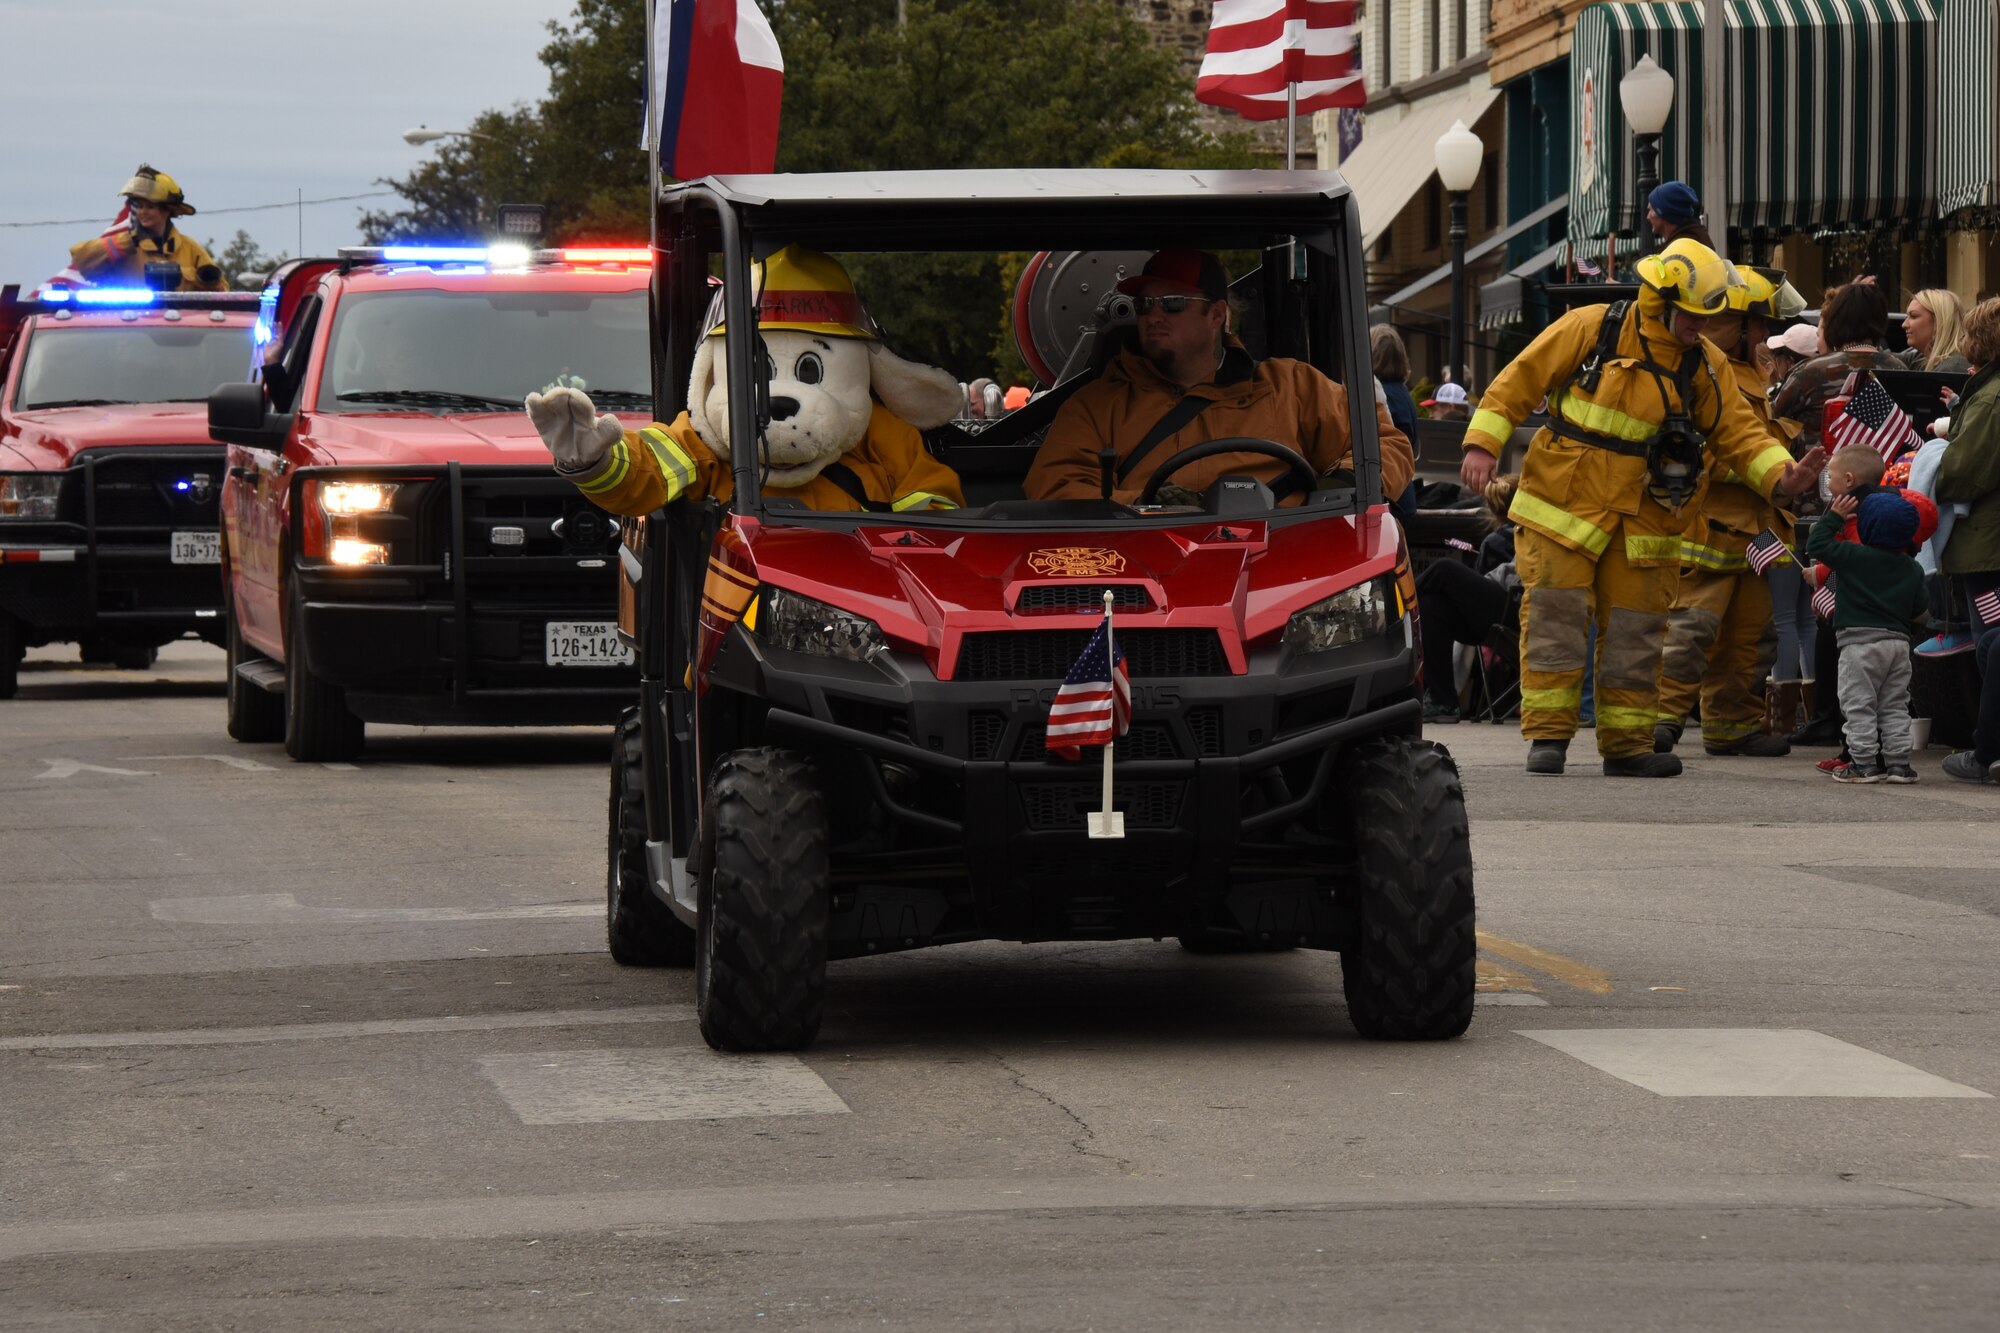 Sparky the Firedog joins the Grape Creek Volunteer Fire Department during the Veterans Day Parade in San Angelo, Texas, Nov. 10, 2018. San Angelo hosted the parade in honor of those serving and those who have served the country. (U.S. Air Force photo by Airman 1st Class Zachary Chapman/Released)